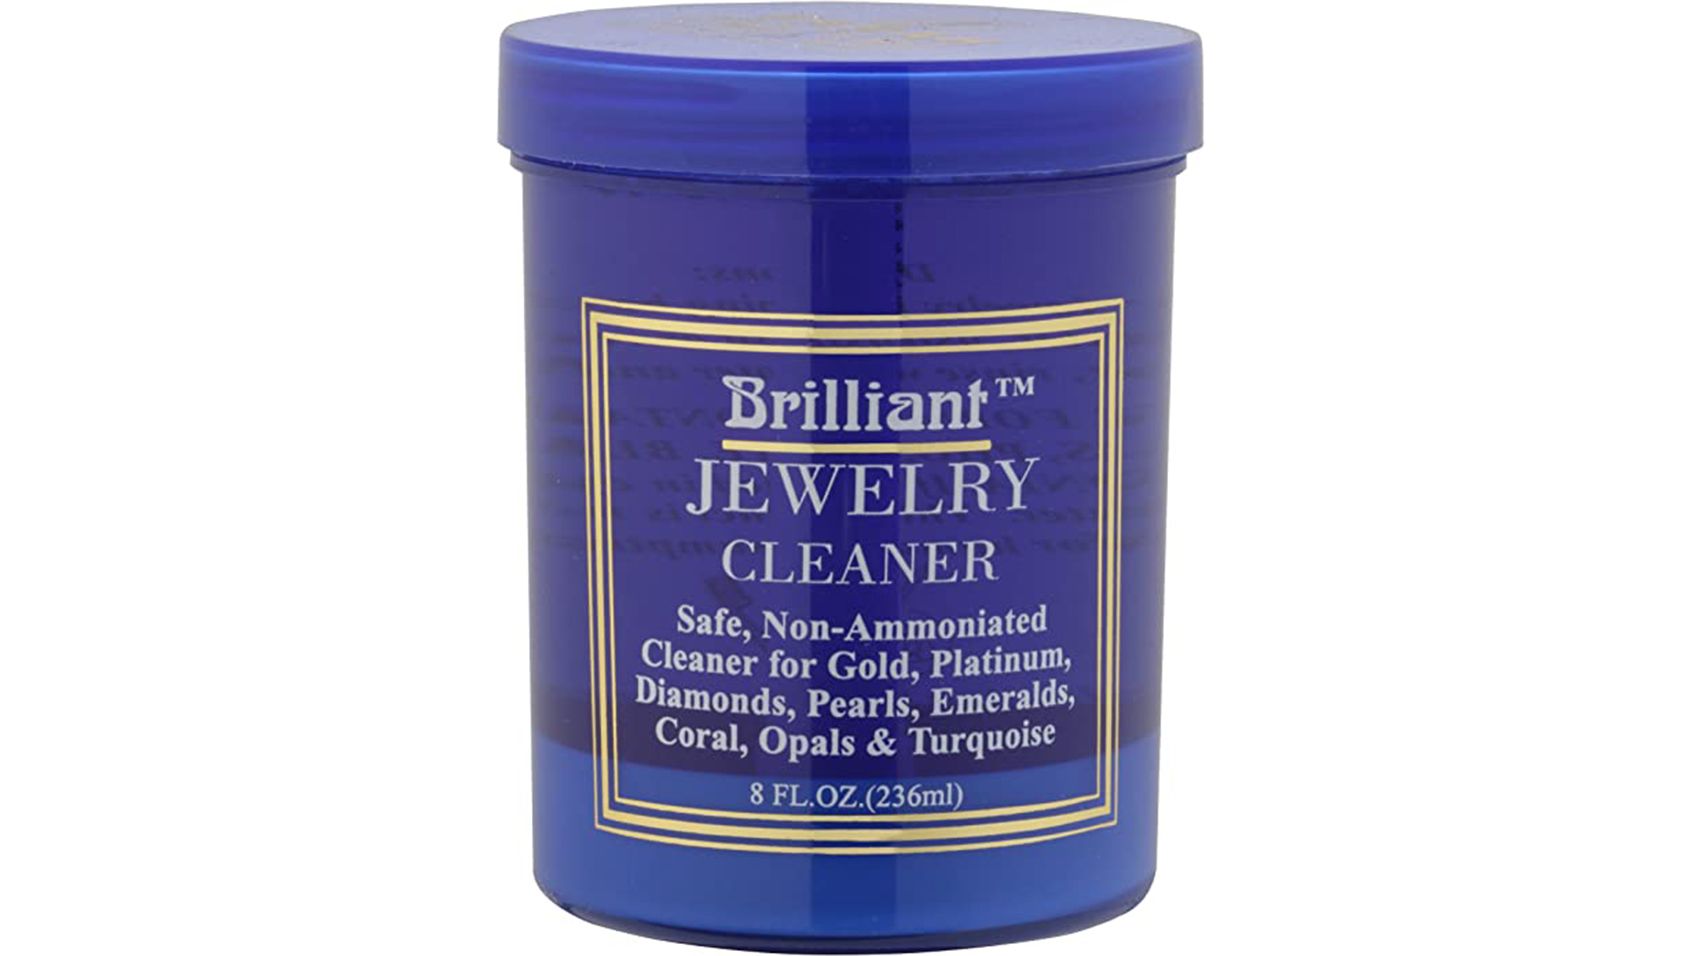 Brilliant Jewelry Cleaner, Blue & Silver Dip Cleaner, Black